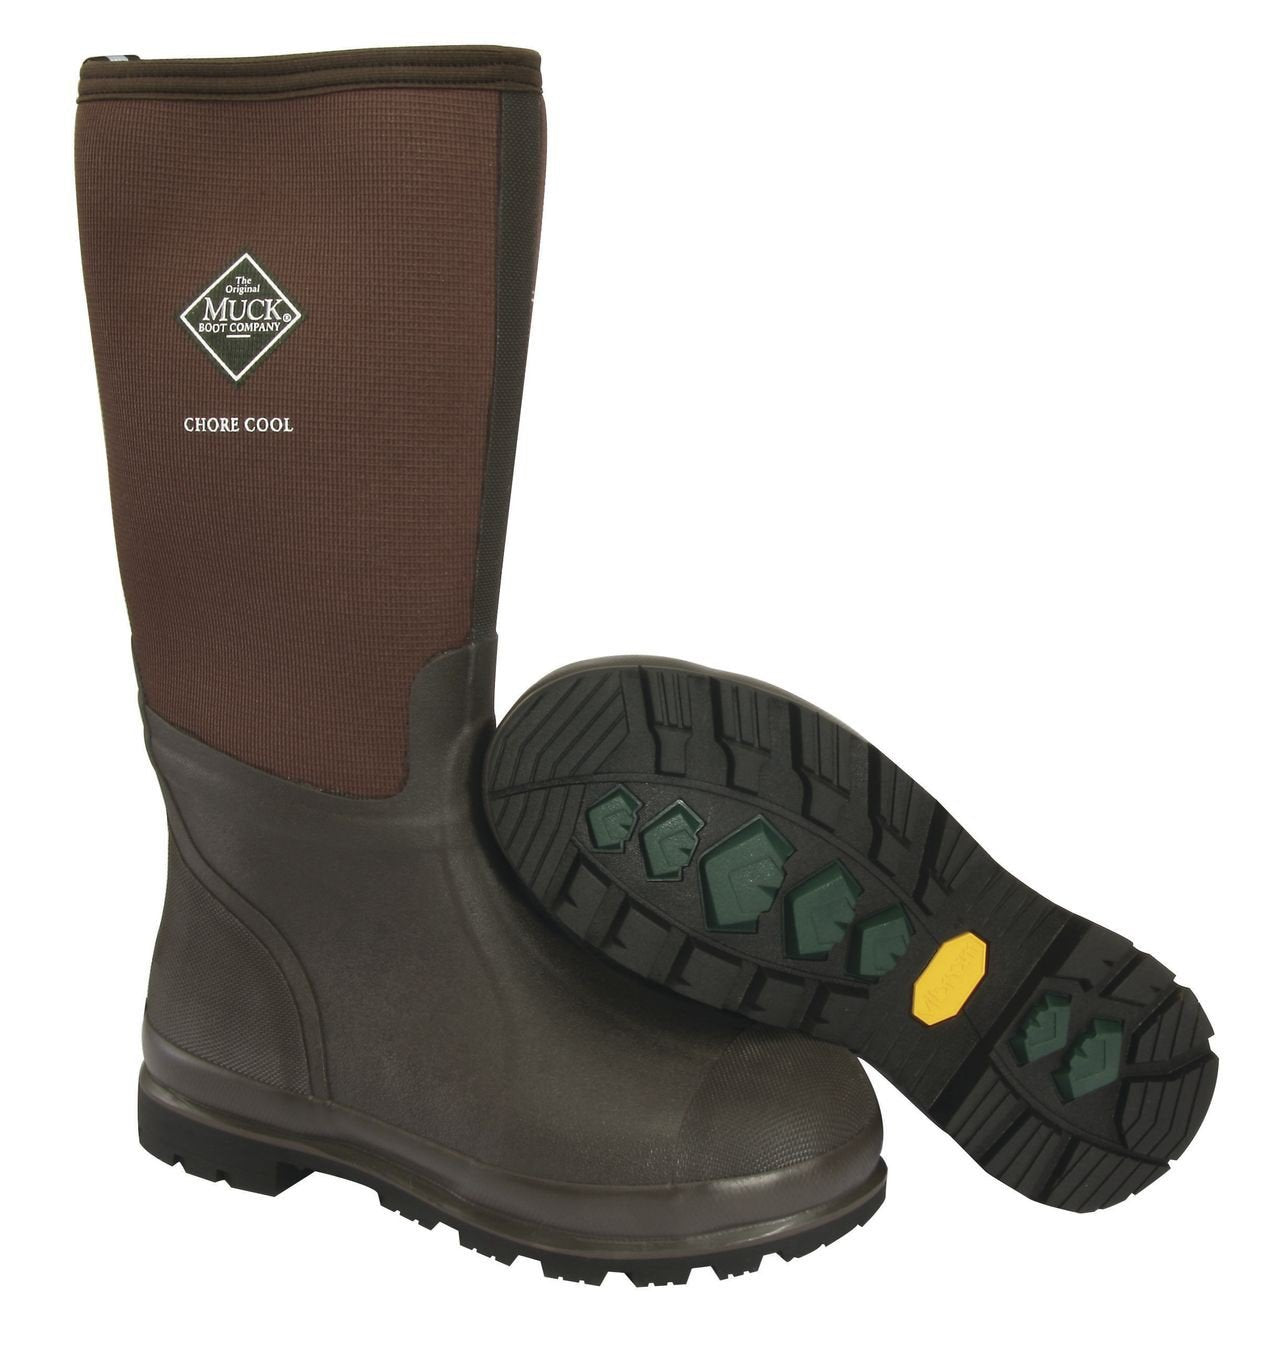 muck boots for hot weather